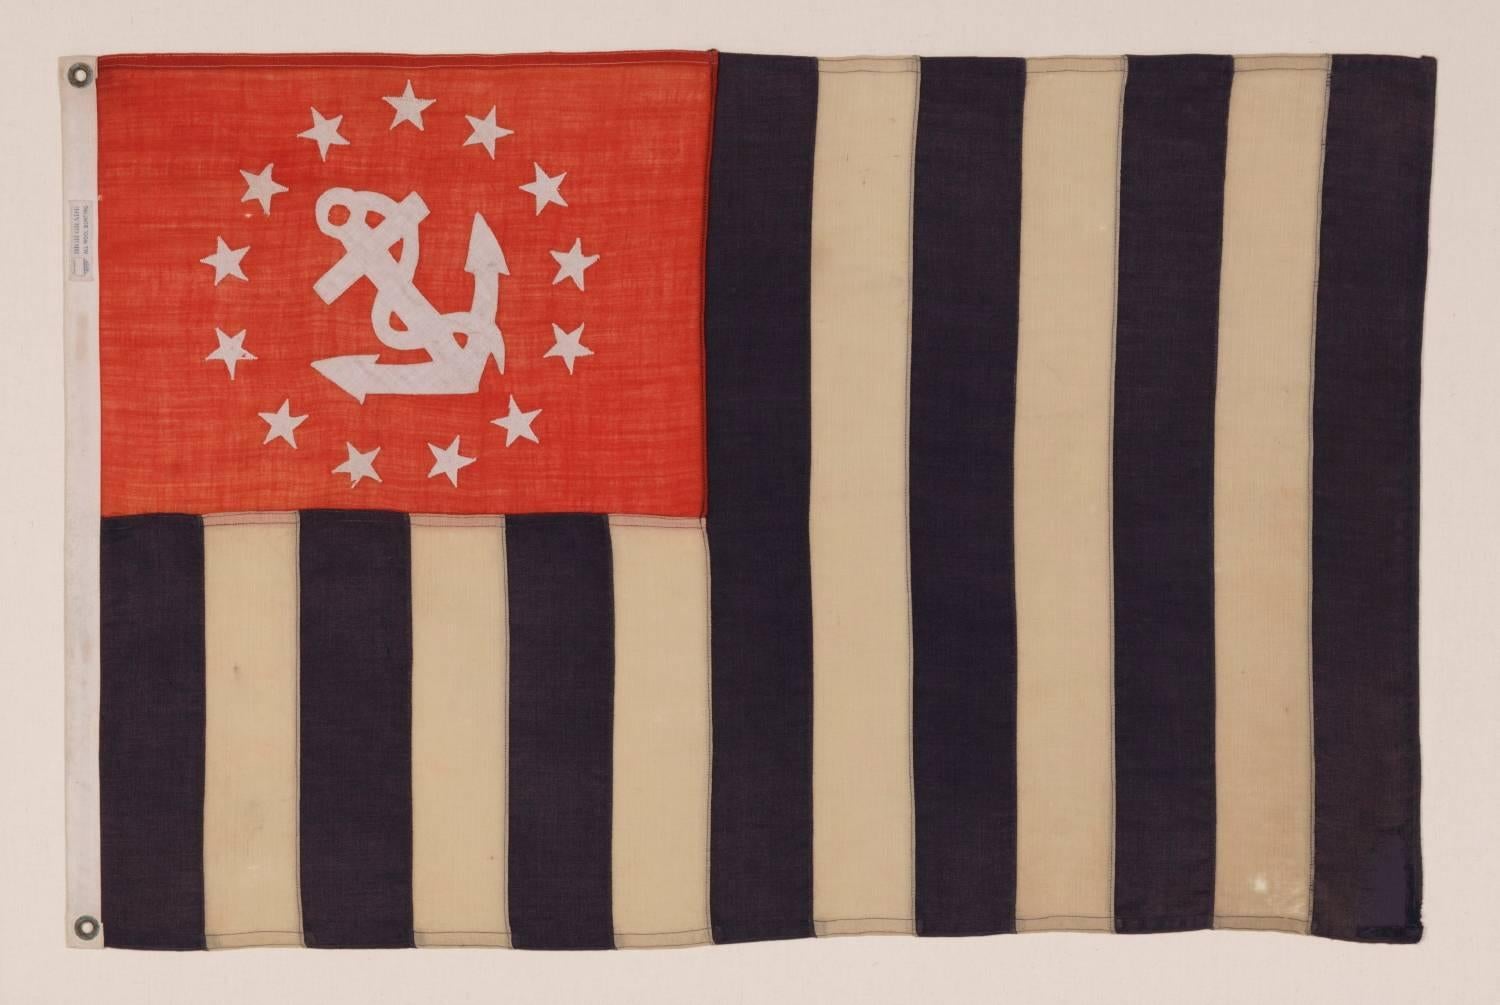 POWER SQUADRONS ENSIGN, MADE BY ANNIN IN NEW YORK CITY, 1914-1920's:

The Power Squadron of the Boston Yacht Club was formed in 1914. It was the first organization in the new sport of power boating and was dedicated to educating and training power